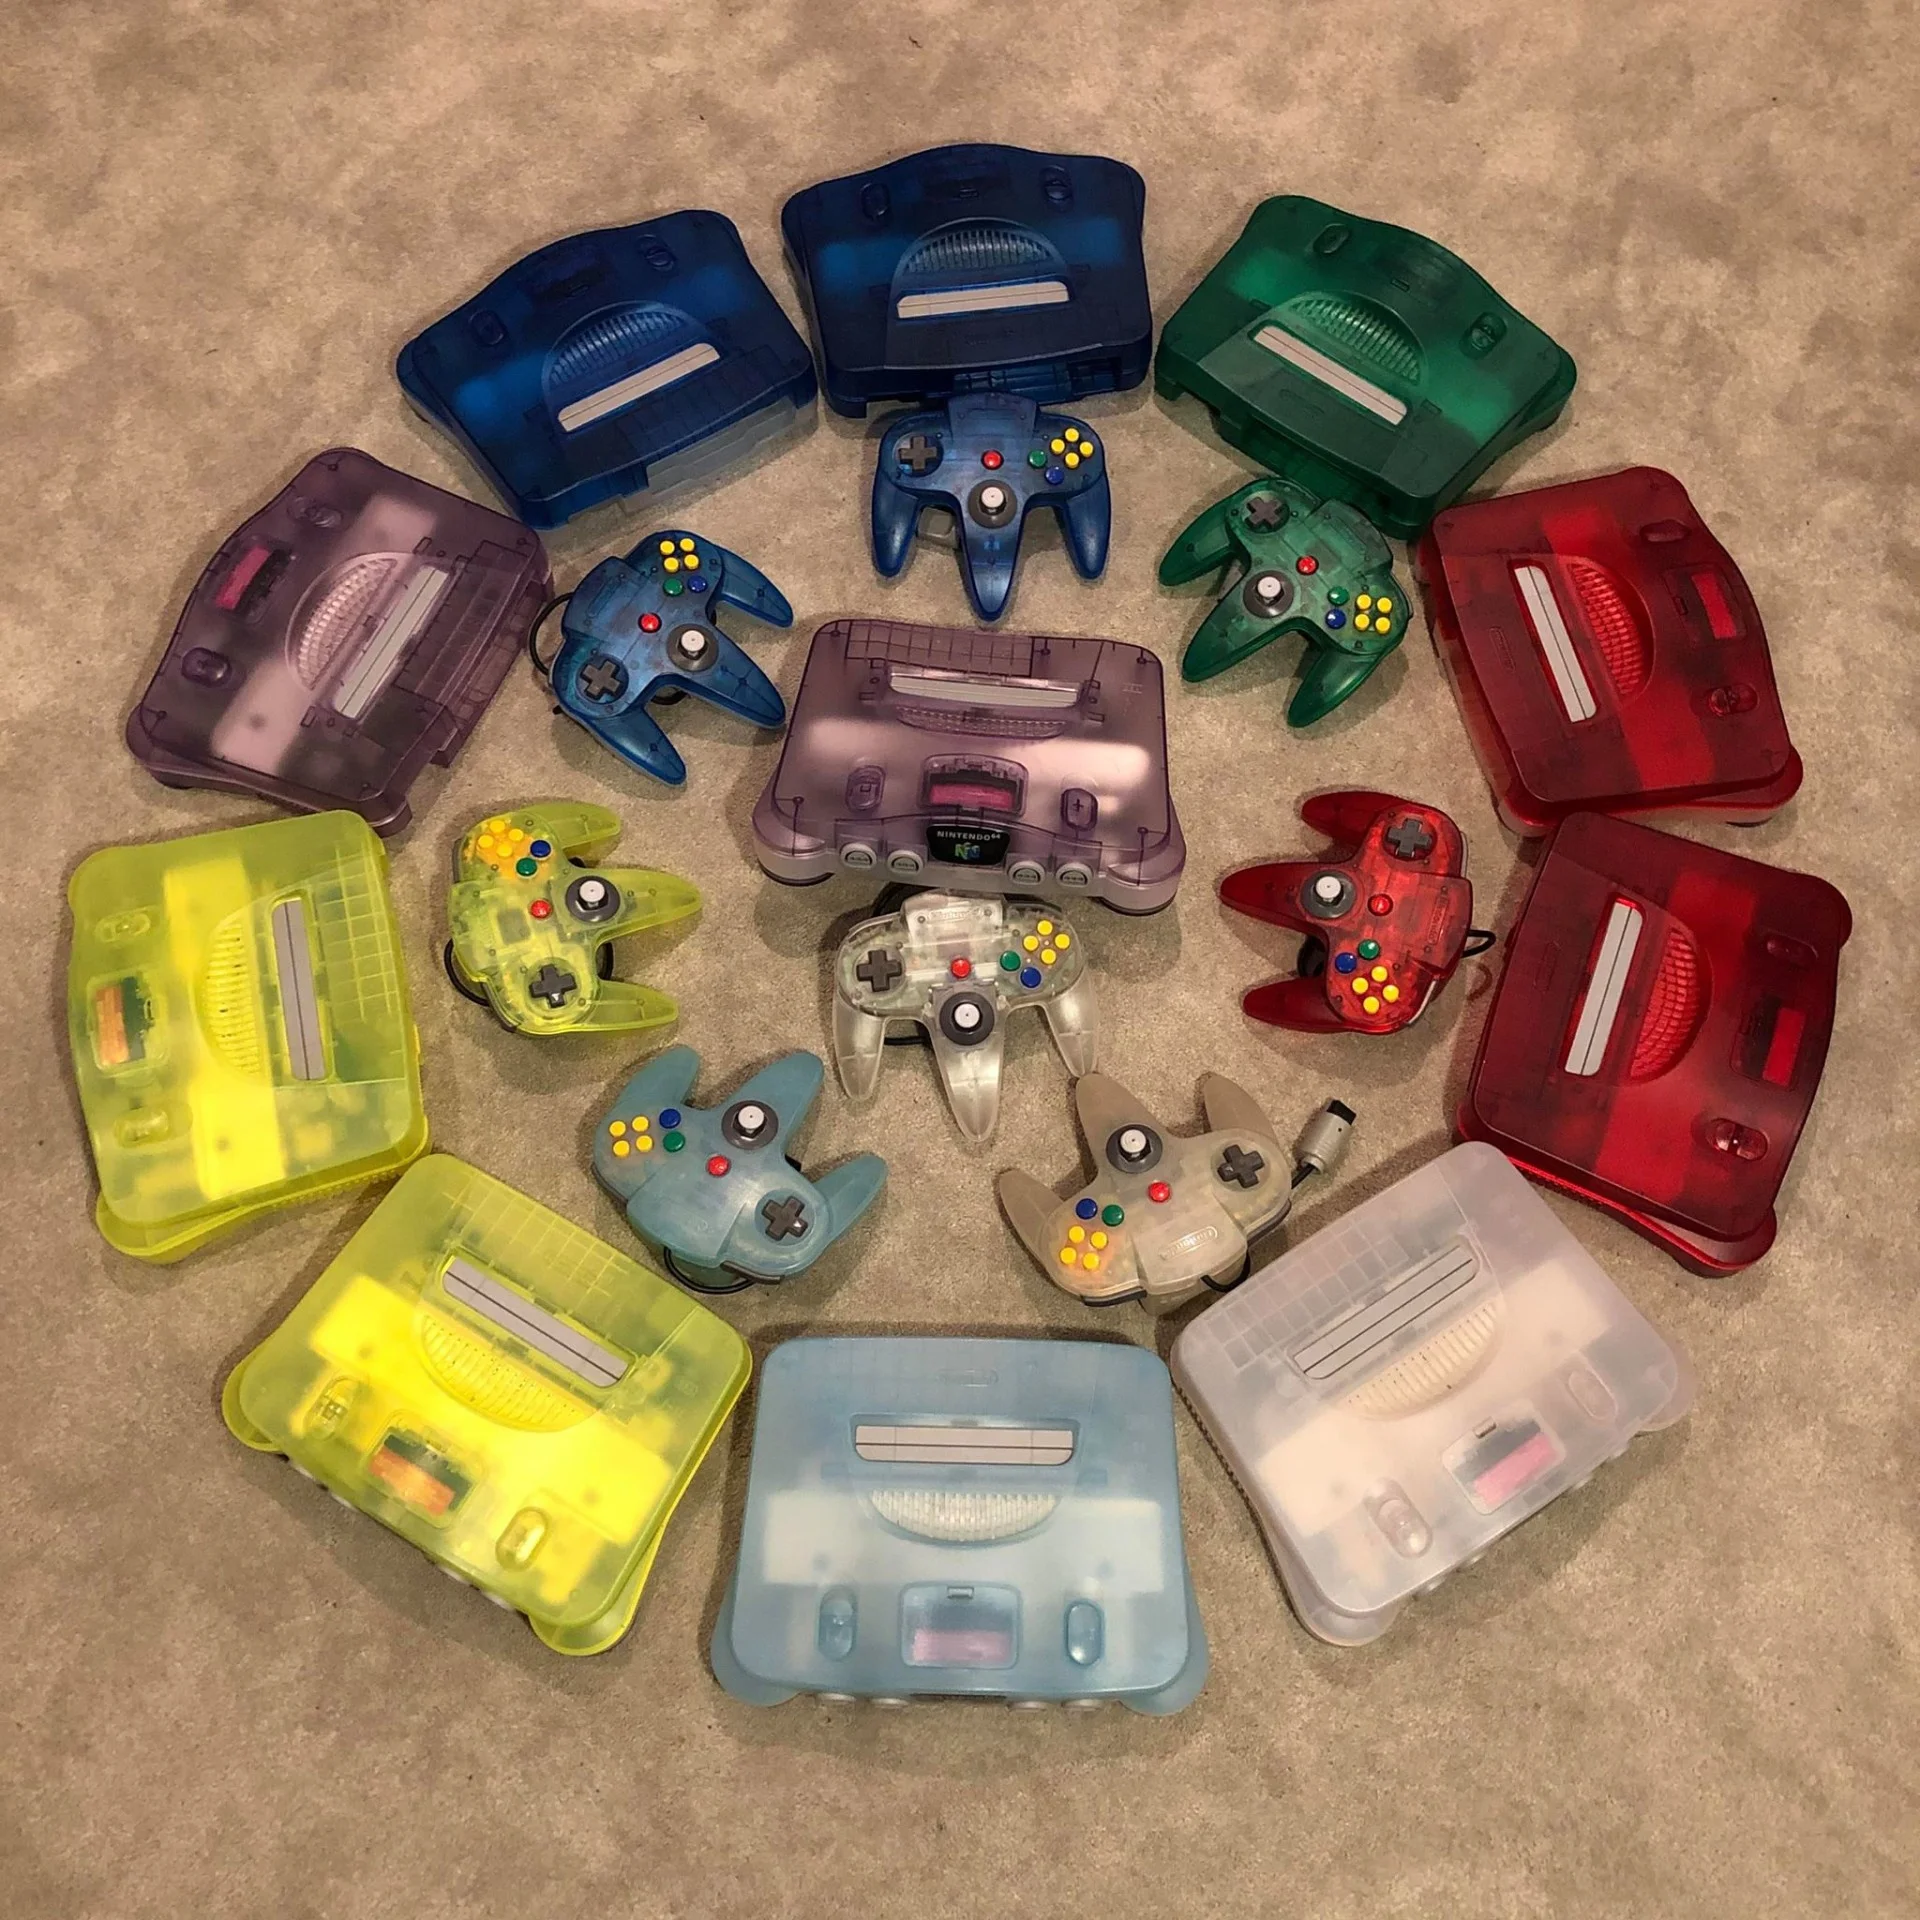 5 rumored N64 Prototypes finally discovered + 5 Lost Consoles